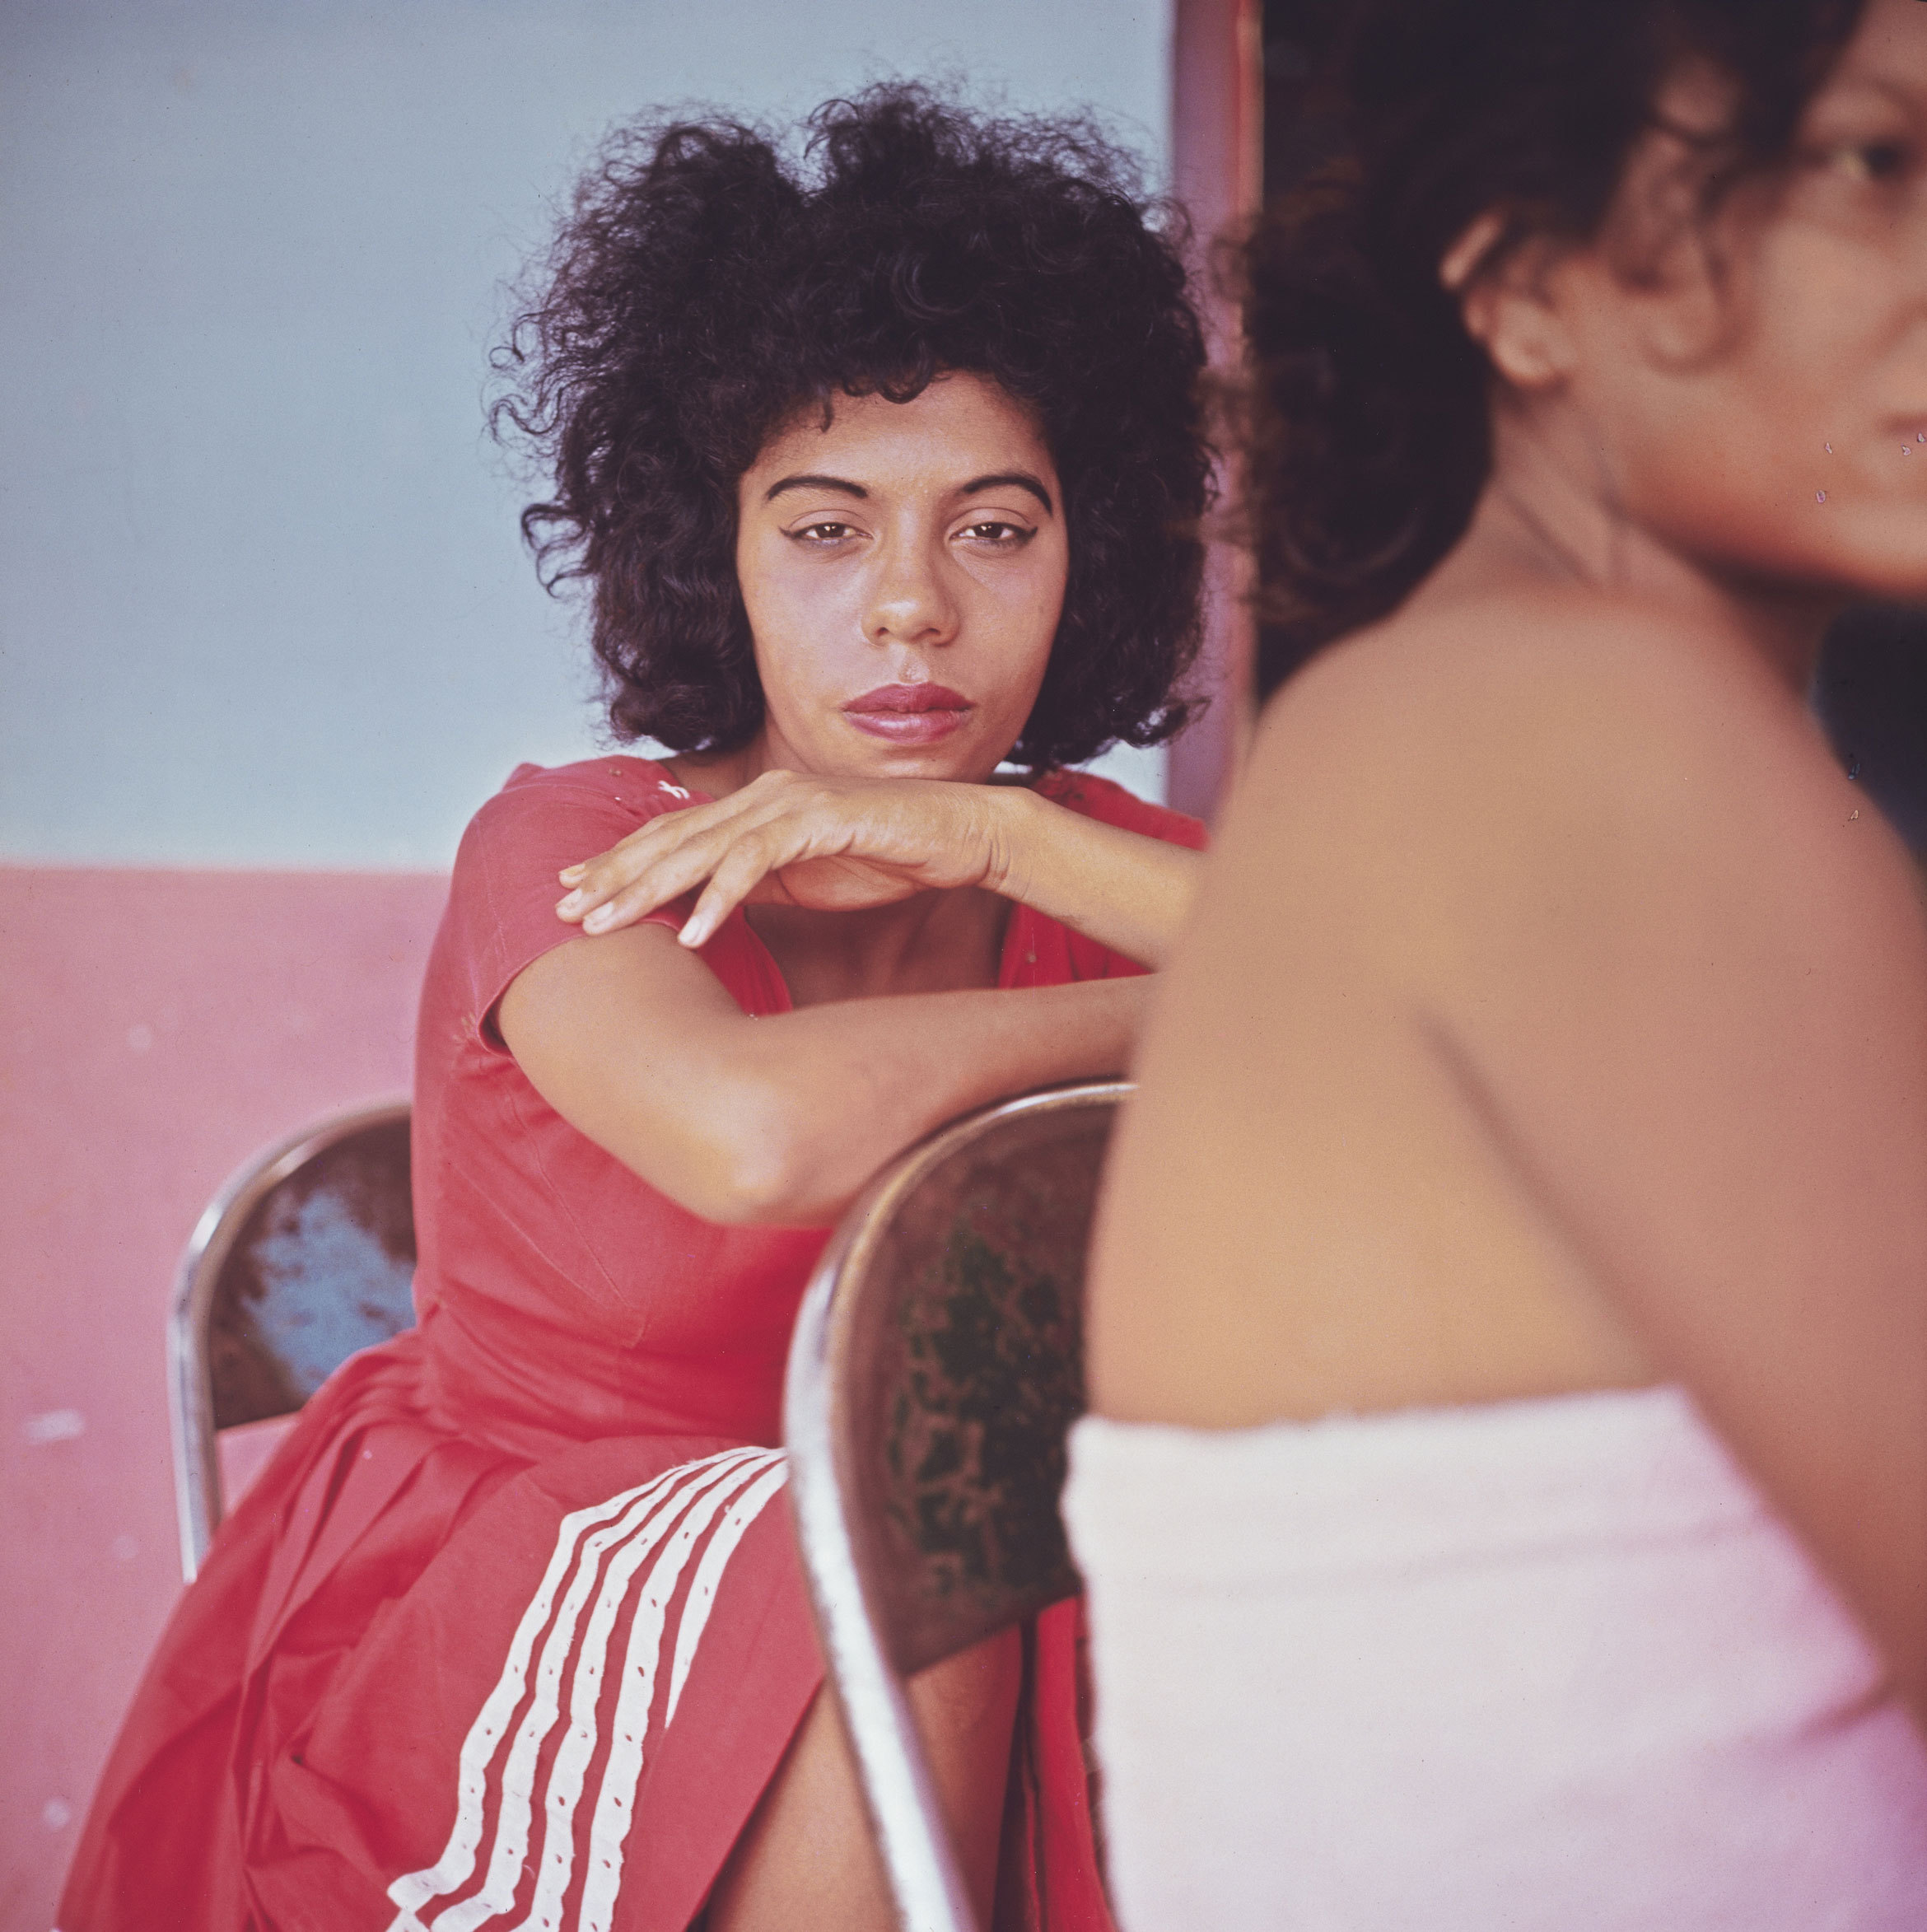 Danny Lyon, Tesca, Cartagena, Colombia, 1966. Cibachrome, printed 2008. Image 25.7 × 25.7 cm (10 1/8 × 10 1/8 in.). Collection of the artist. © Danny Lyon, courtesy Edwynn Houk Gallery, New York